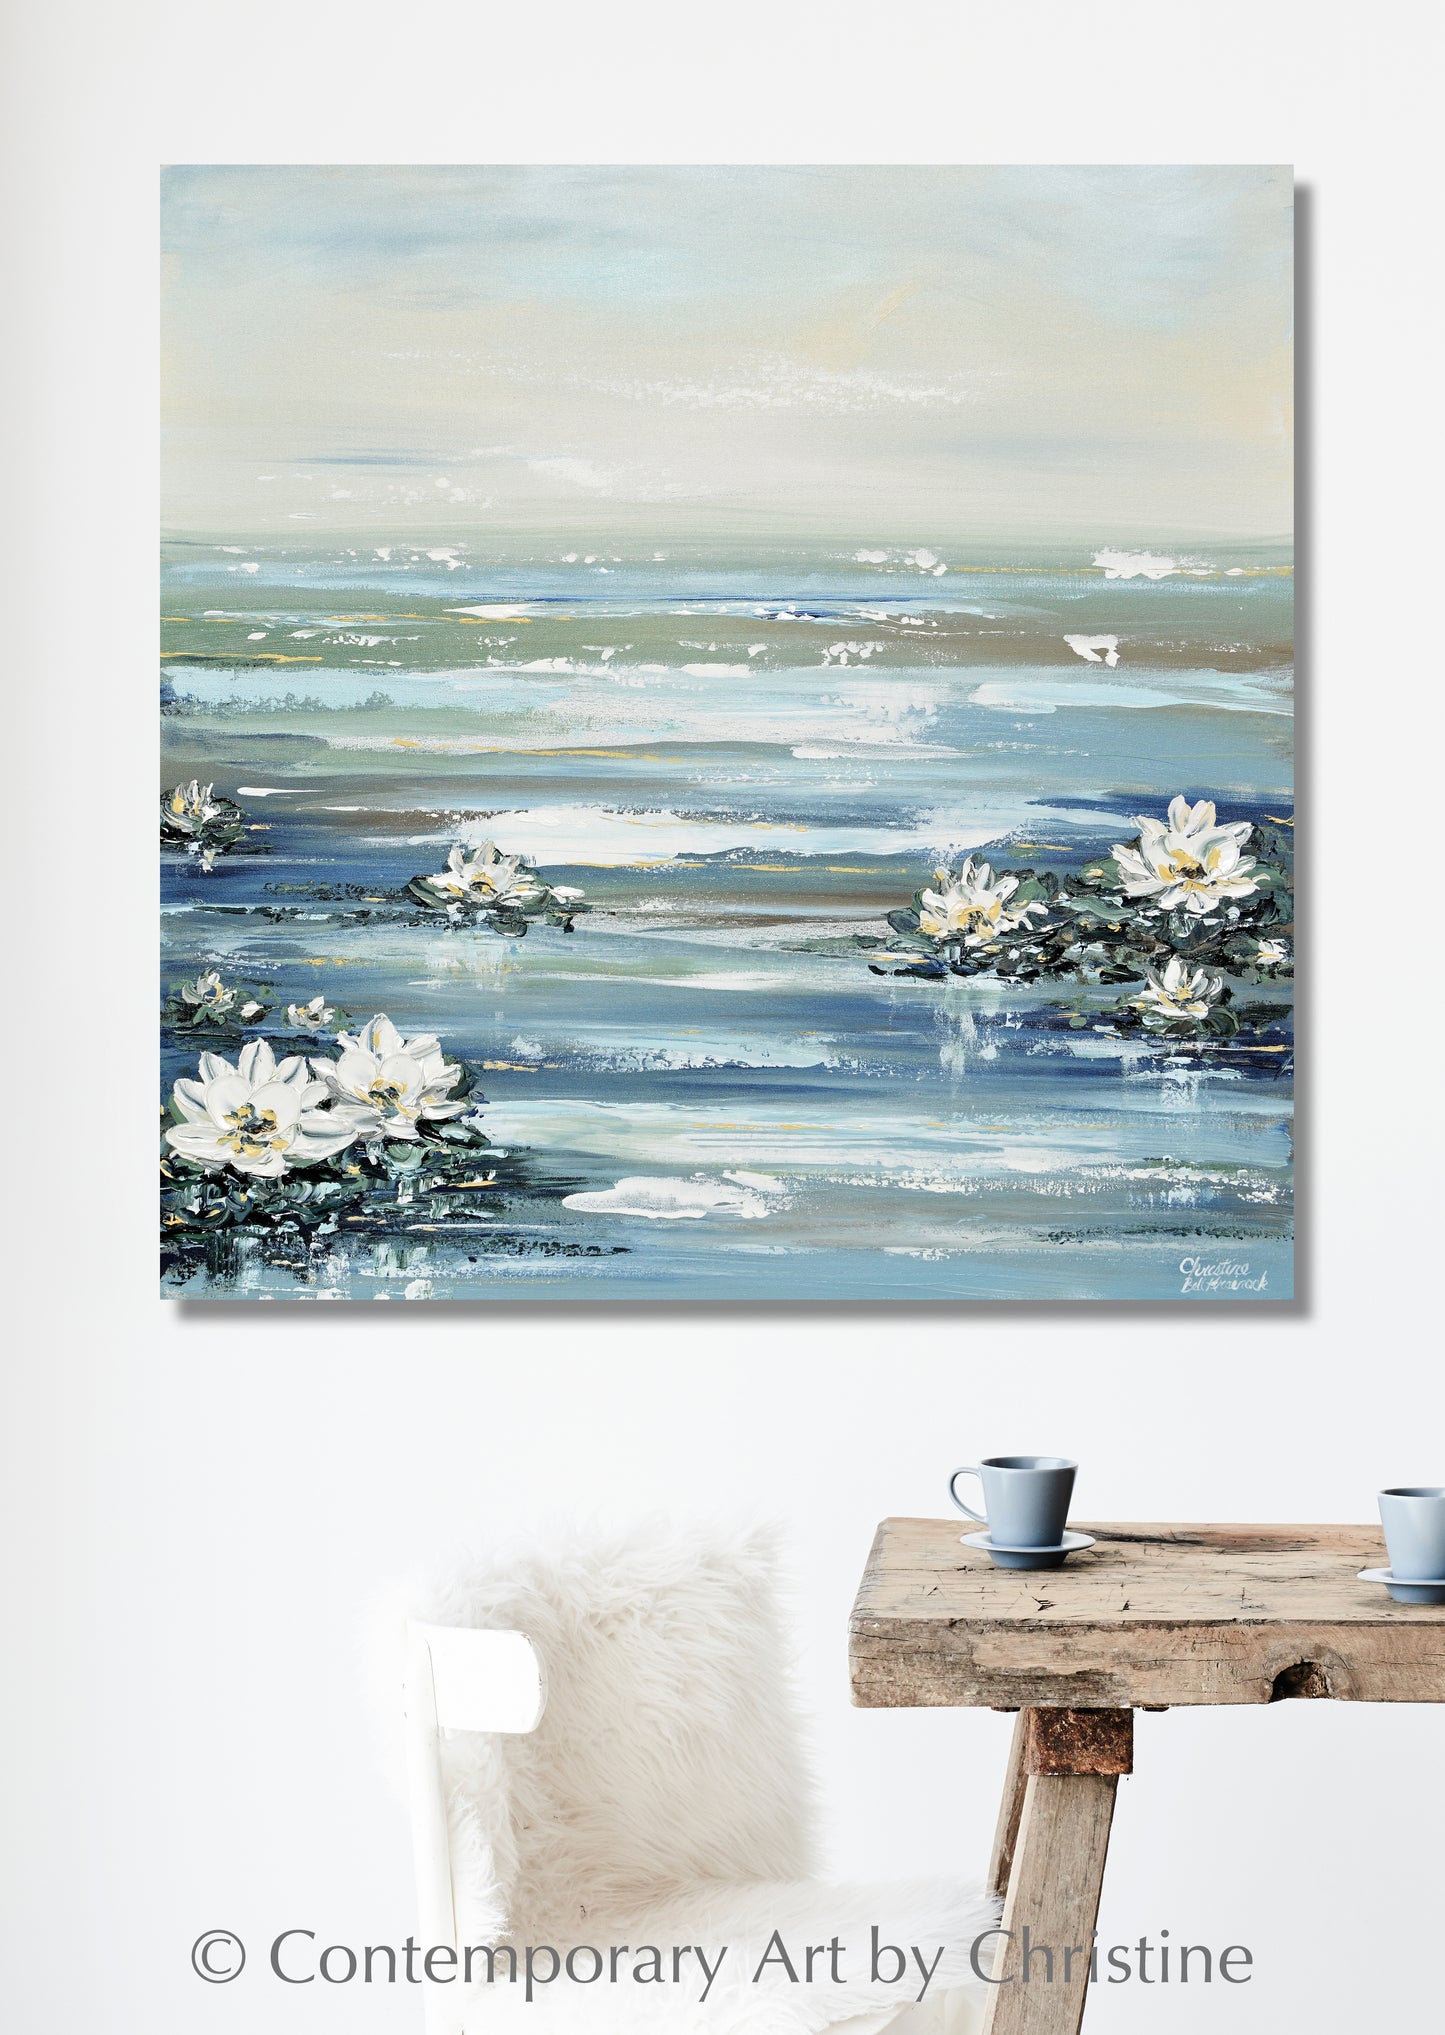 CUSTOM for LYNNETTE ORIGINAL Art Abstract Water Lily Painting Textured Coastal Lotus Flowers Diptych 2 - 36x36"